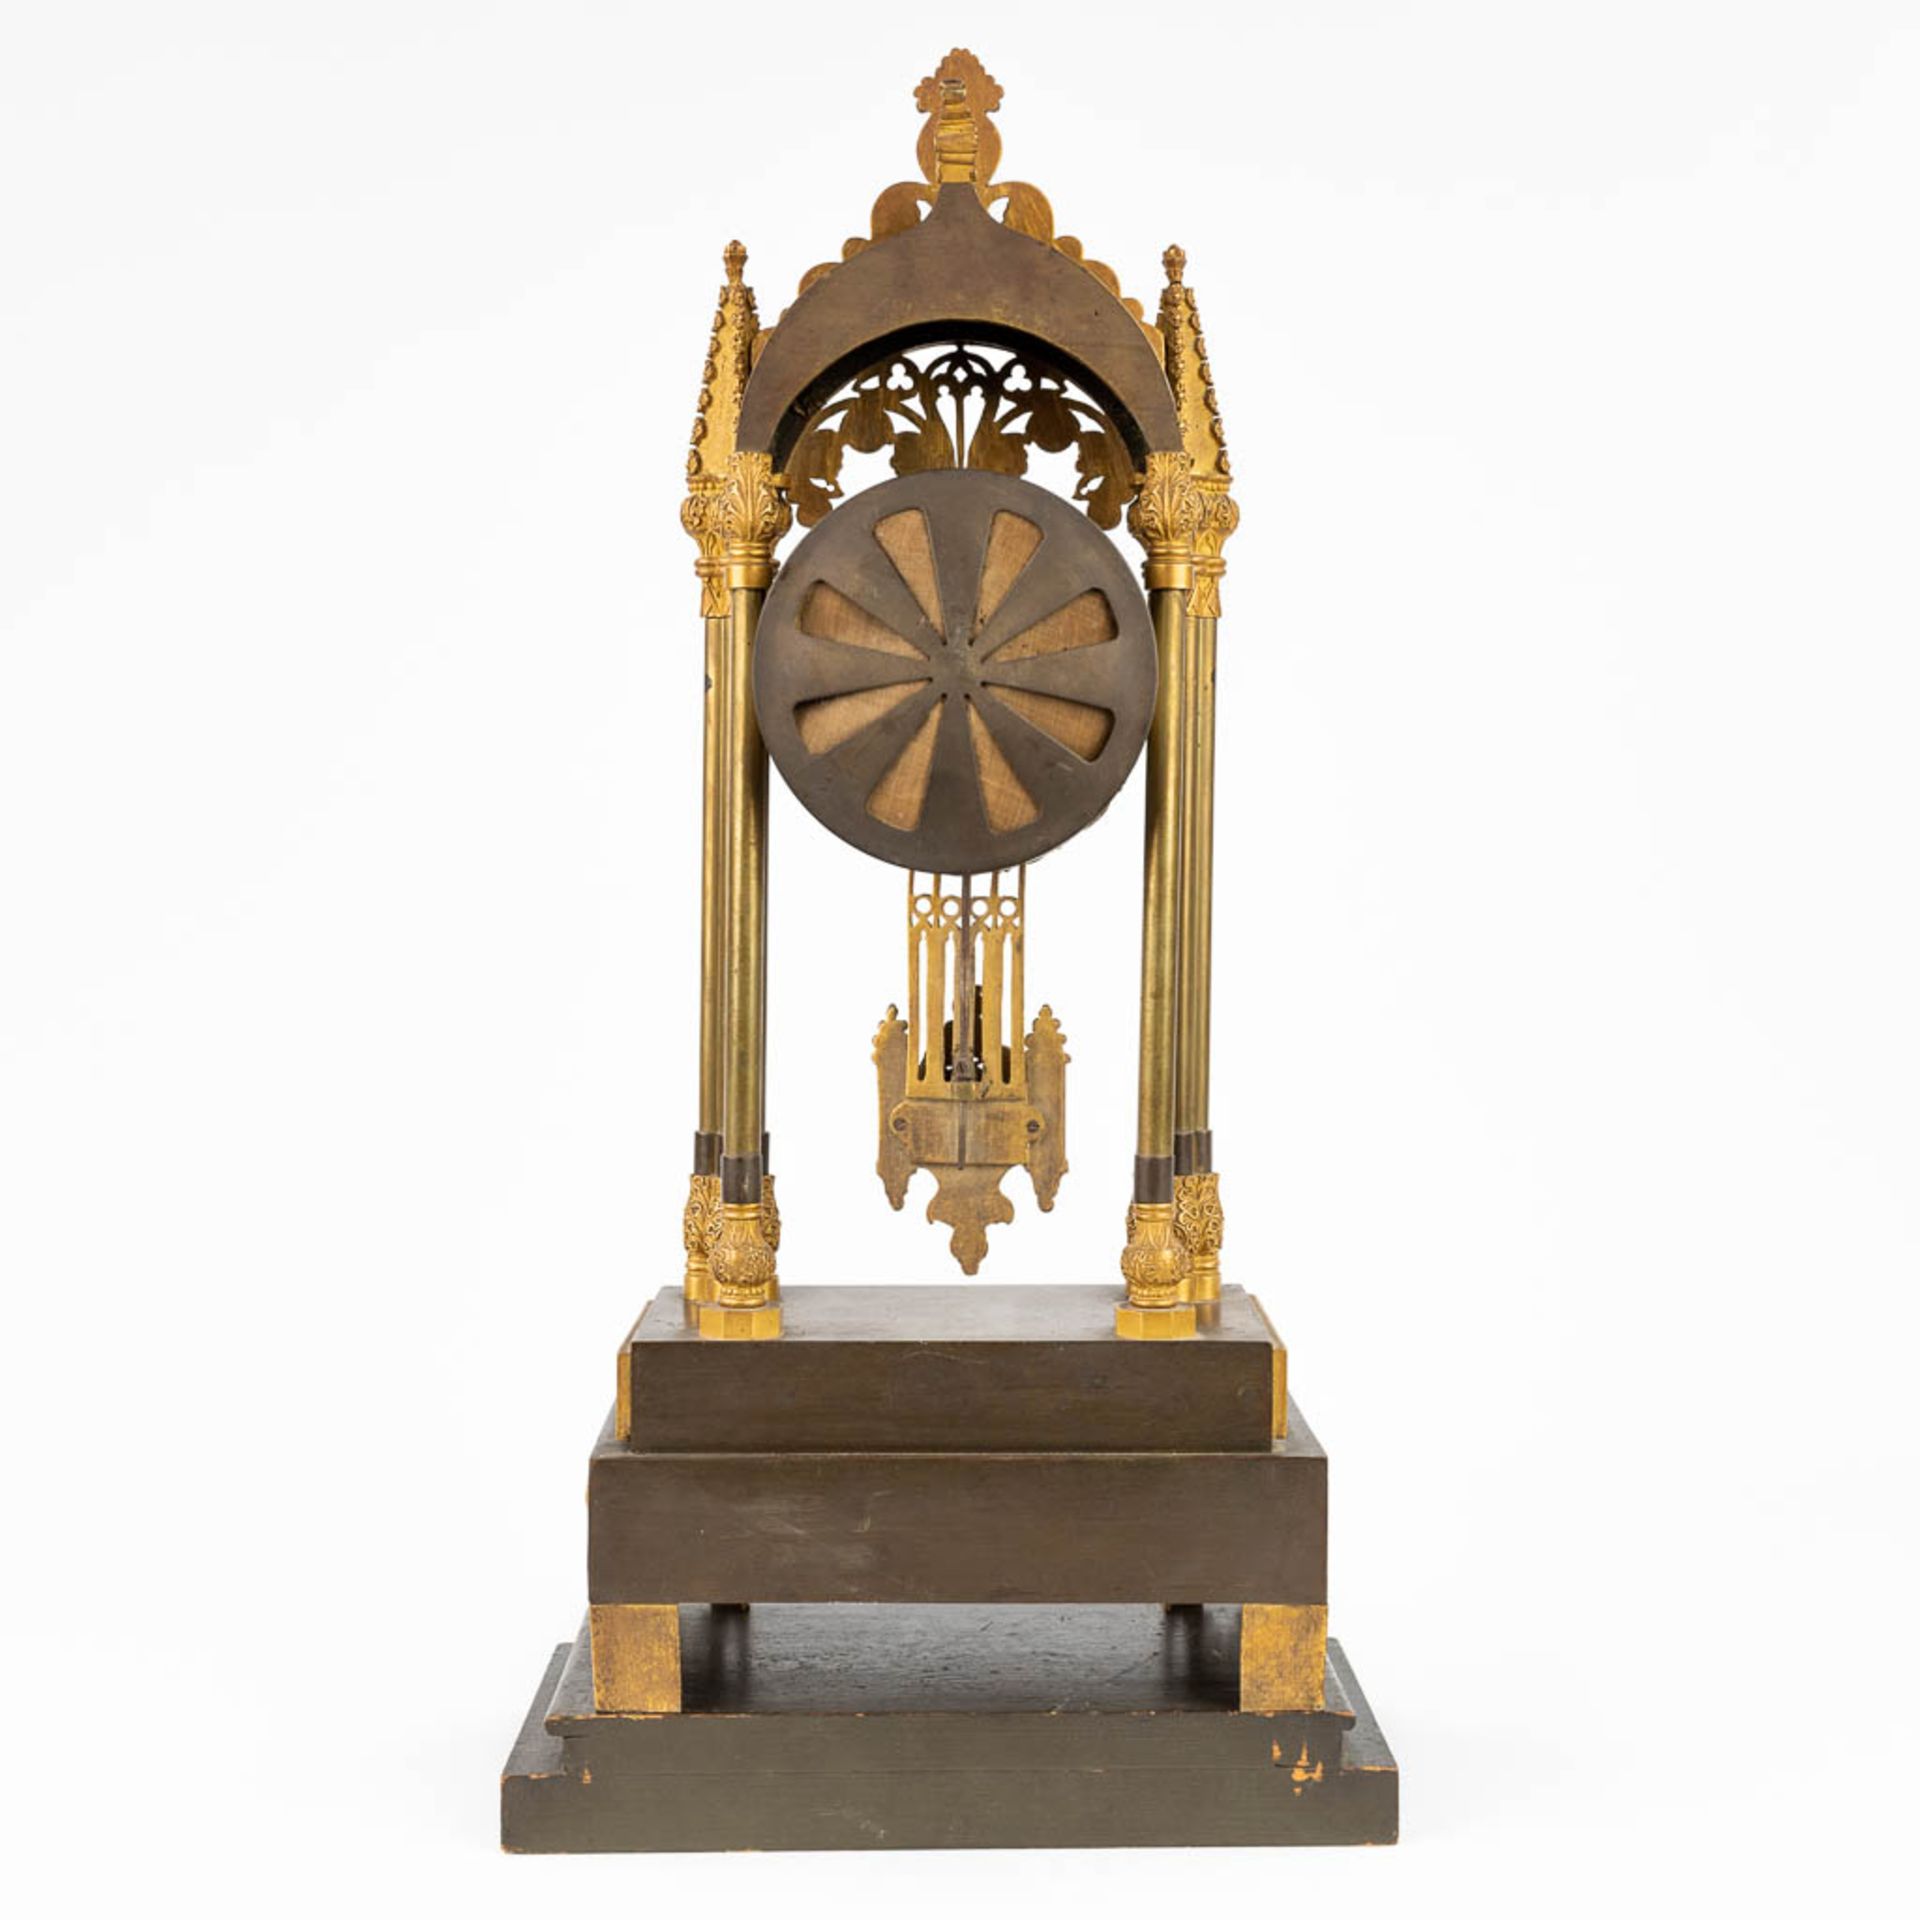 A table column clock made of gilt bronze in a gothic revival style. (11 x 19,5 x 43cm) - Image 3 of 15